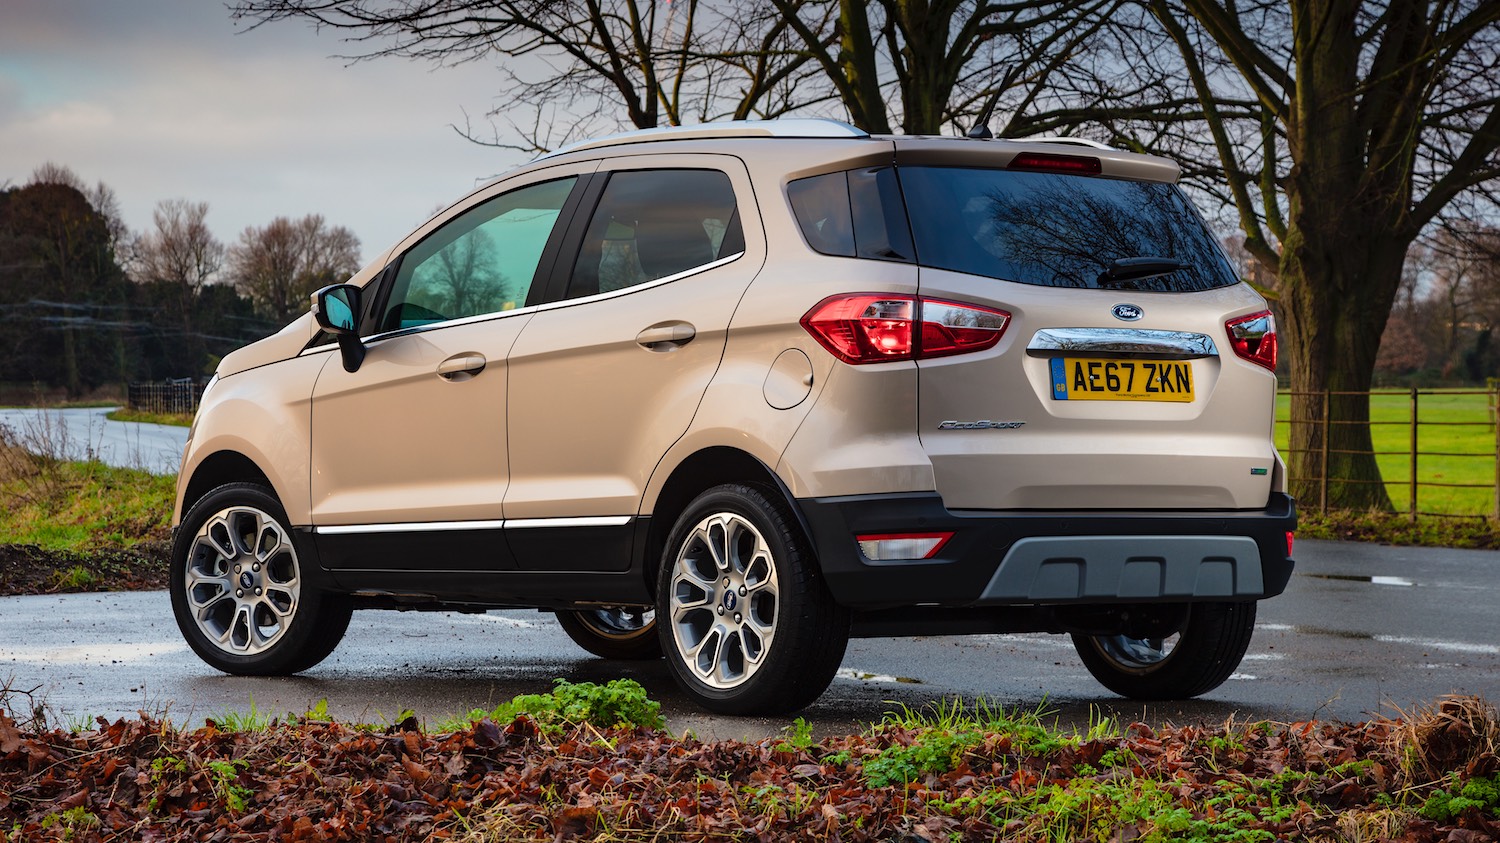 Neil Lyndon reviews the latest Ford EcoSport Titanium for Drive 6